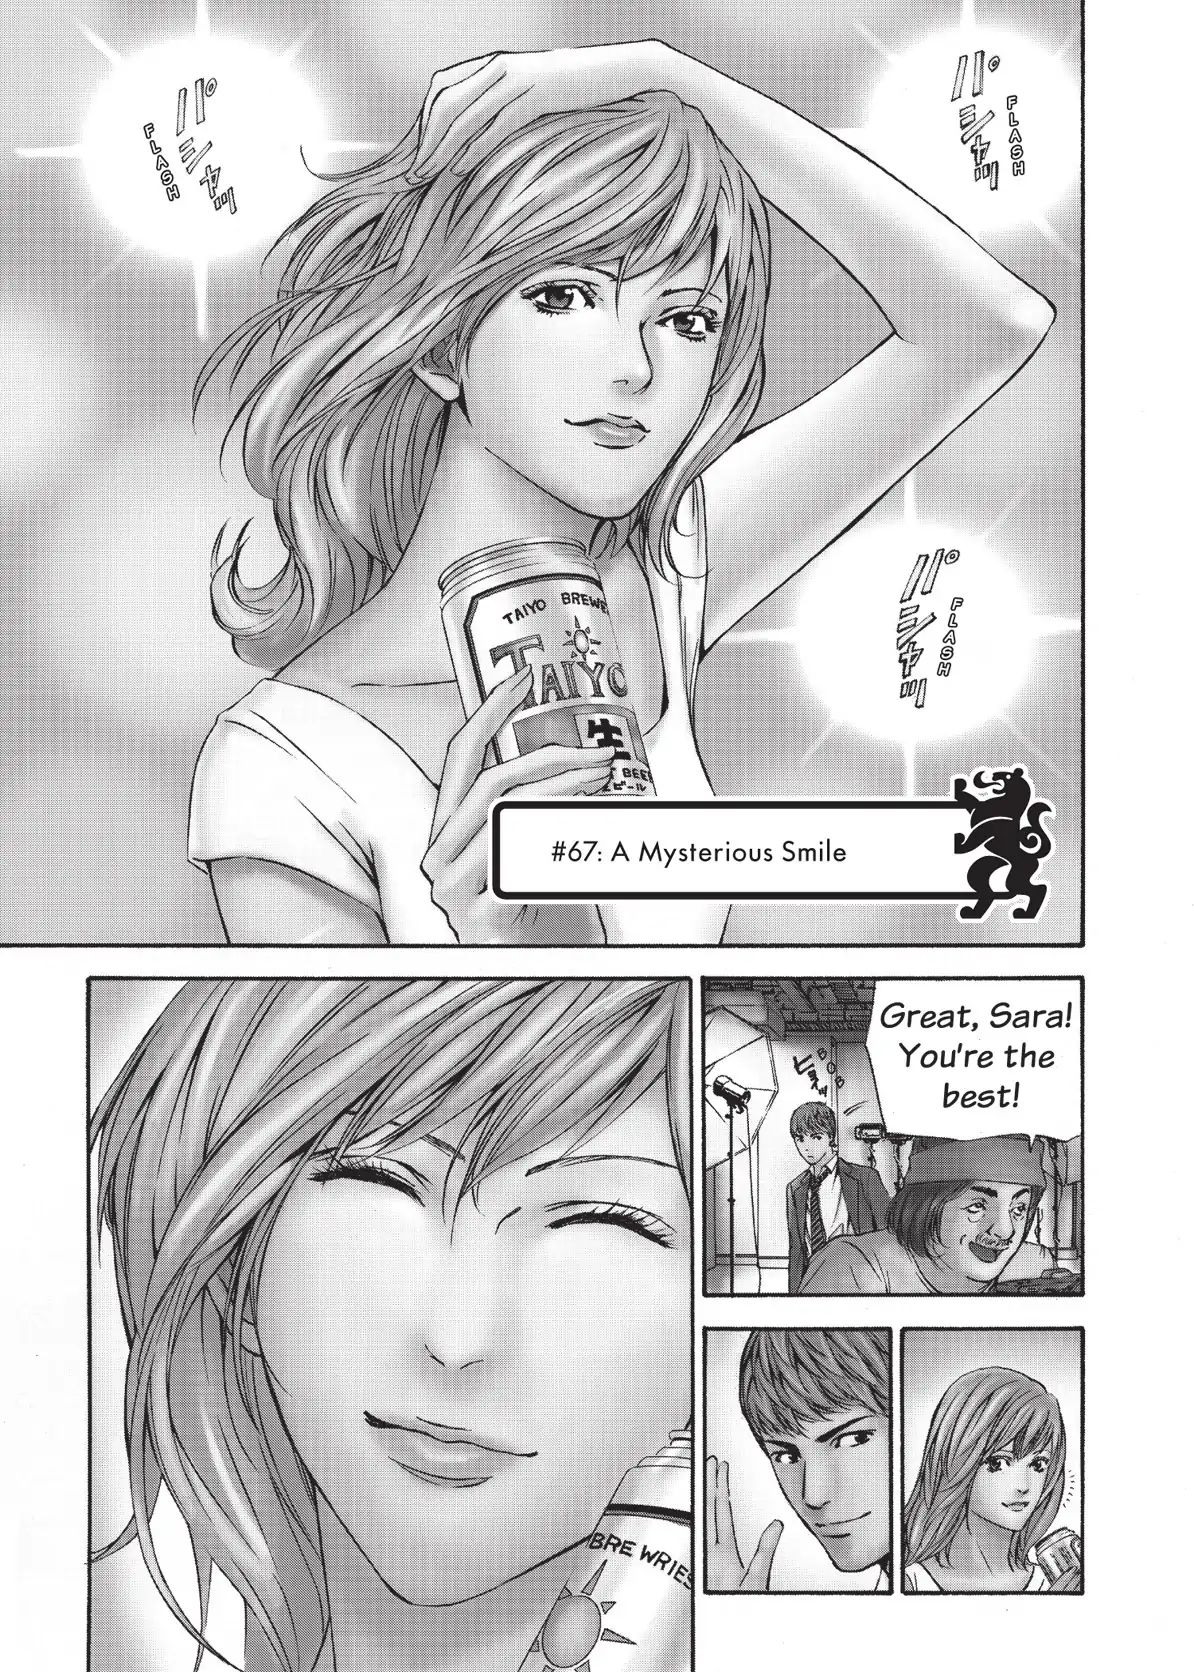 Kami No Shizuku Vol.4 Chapter 67: A Mysterious Smile - Picture 1